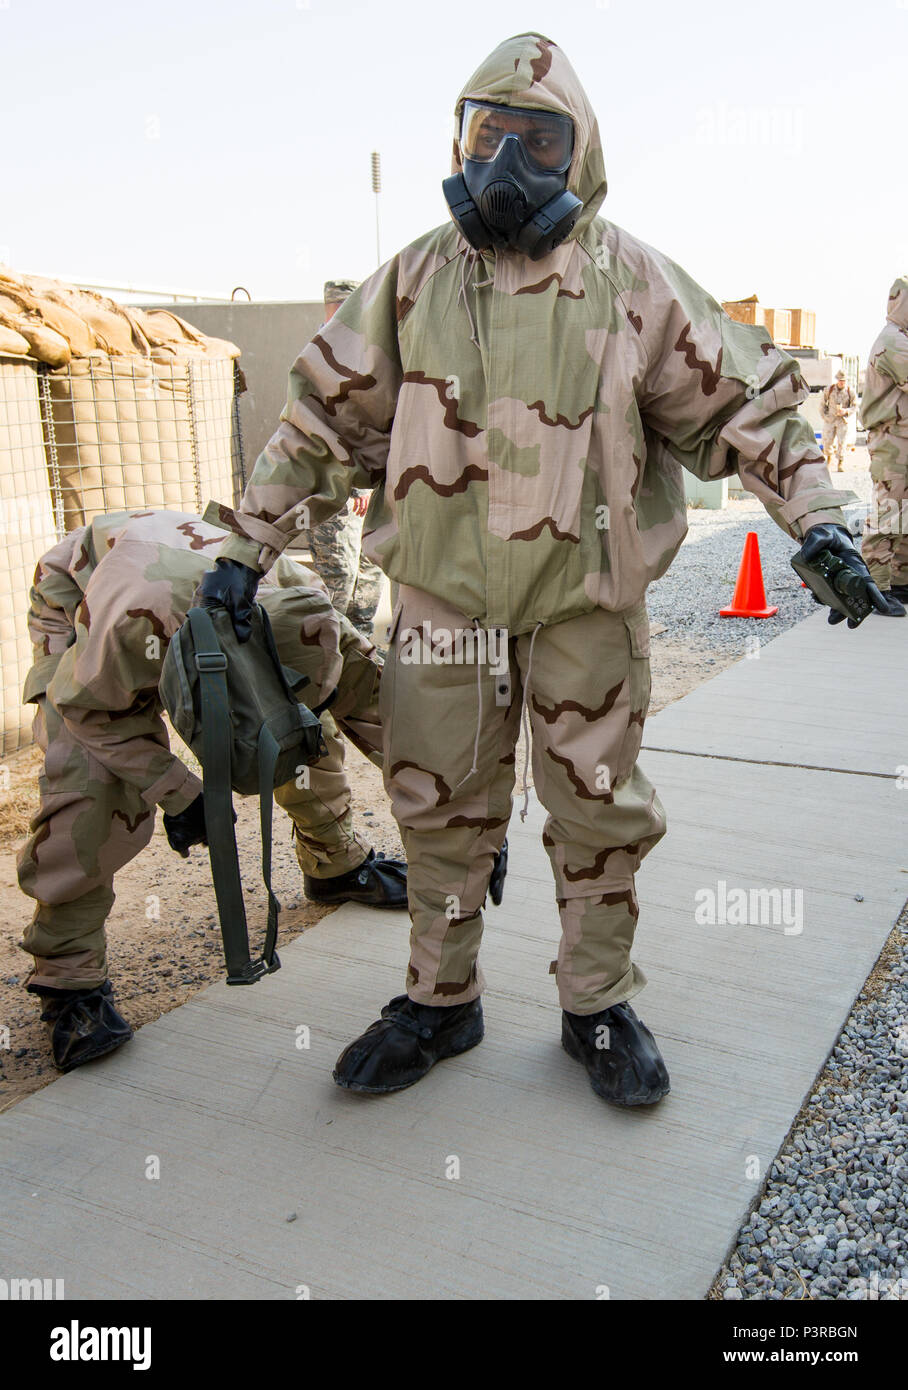 U.S. Marine Lance Cpl. Kory Wormington, a military policeman with 1st Law Enforcement Detachment, Special Purpose Marine Air-Ground Task Force - Crisis Response - Central Command, is assisted with removing his “contaminated” Mission Oriented Protective Posture suit during a Reconnaissance , Surveillance and Decontamination course run by Chemical, Biological, Radiological and Nuclear Defense Marines while forward deployed, July 16, 2016. SPMAGTF-CR-CC is a crisis response unit that has the ability to project combat power throughout the Central Command area of responsibility, using organic aviat Stock Photo